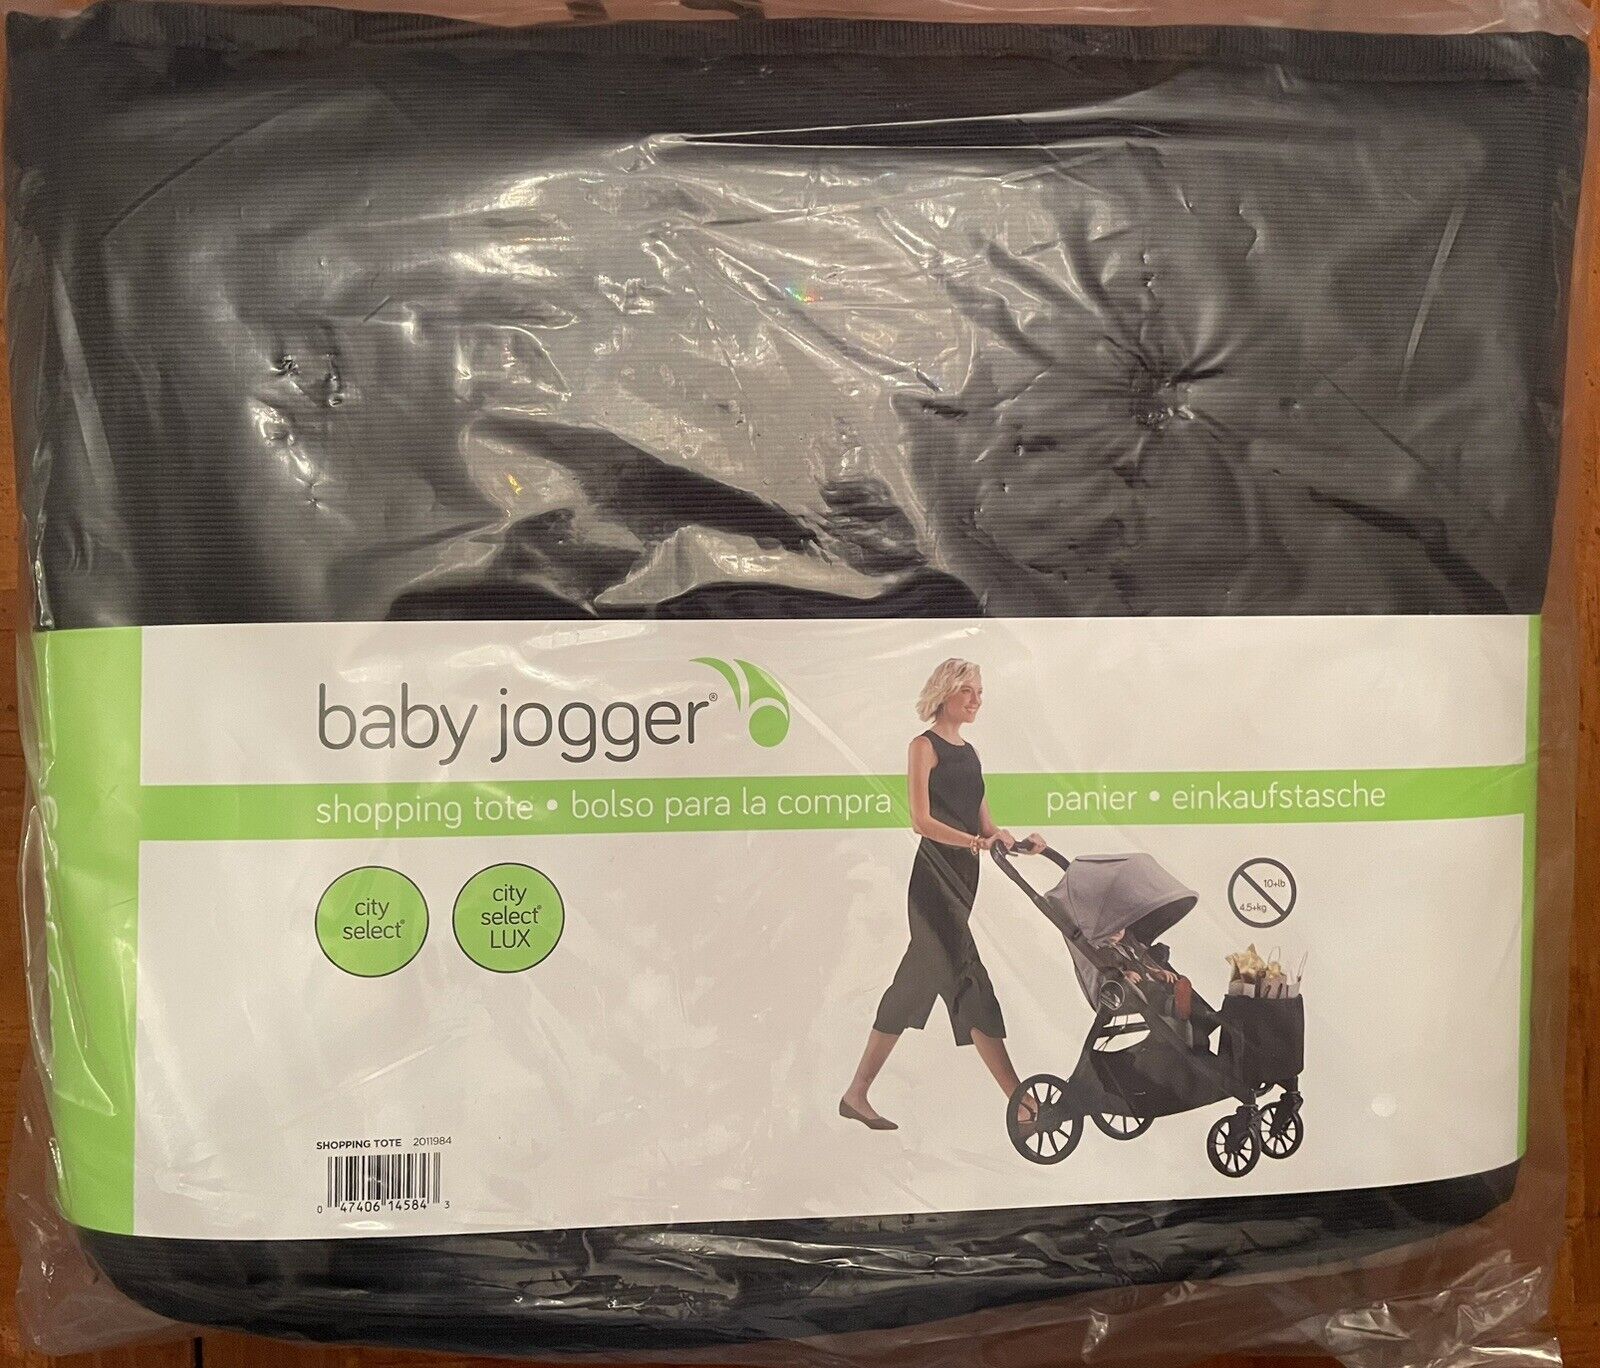 baby jogger city select / city select LUX shopping tote